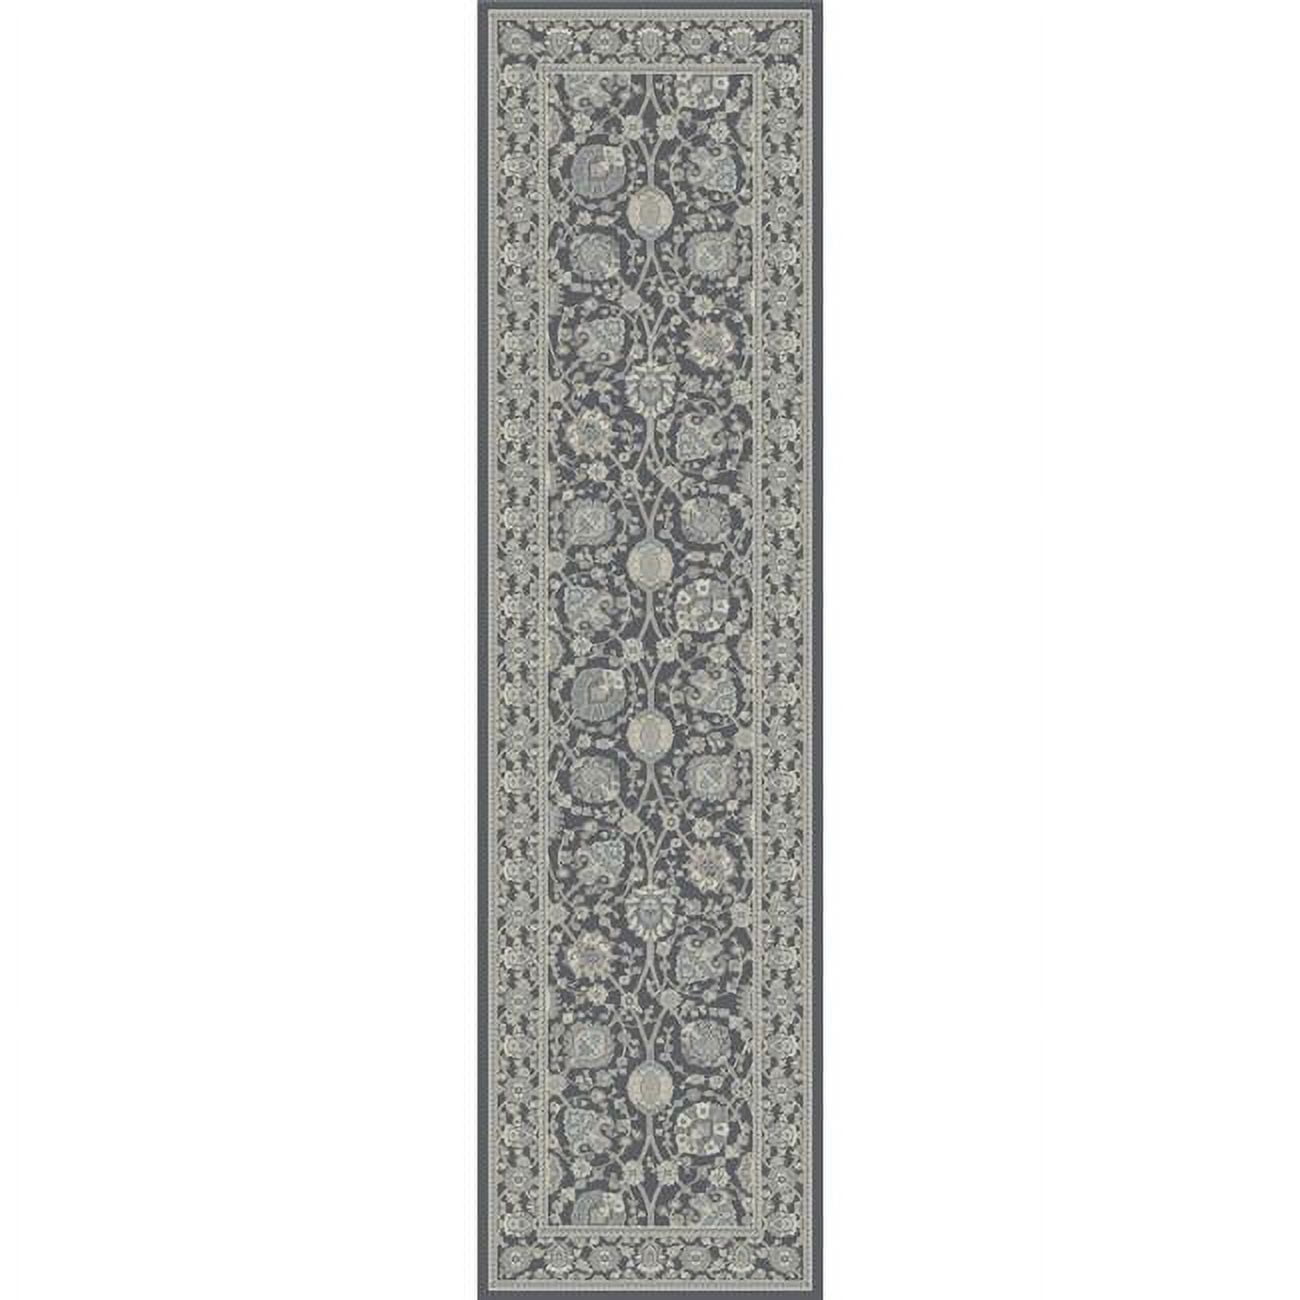 Picture of Concord Global 28462 2 ft. x 7 ft. 3 in. Kashan Kashan - Grey